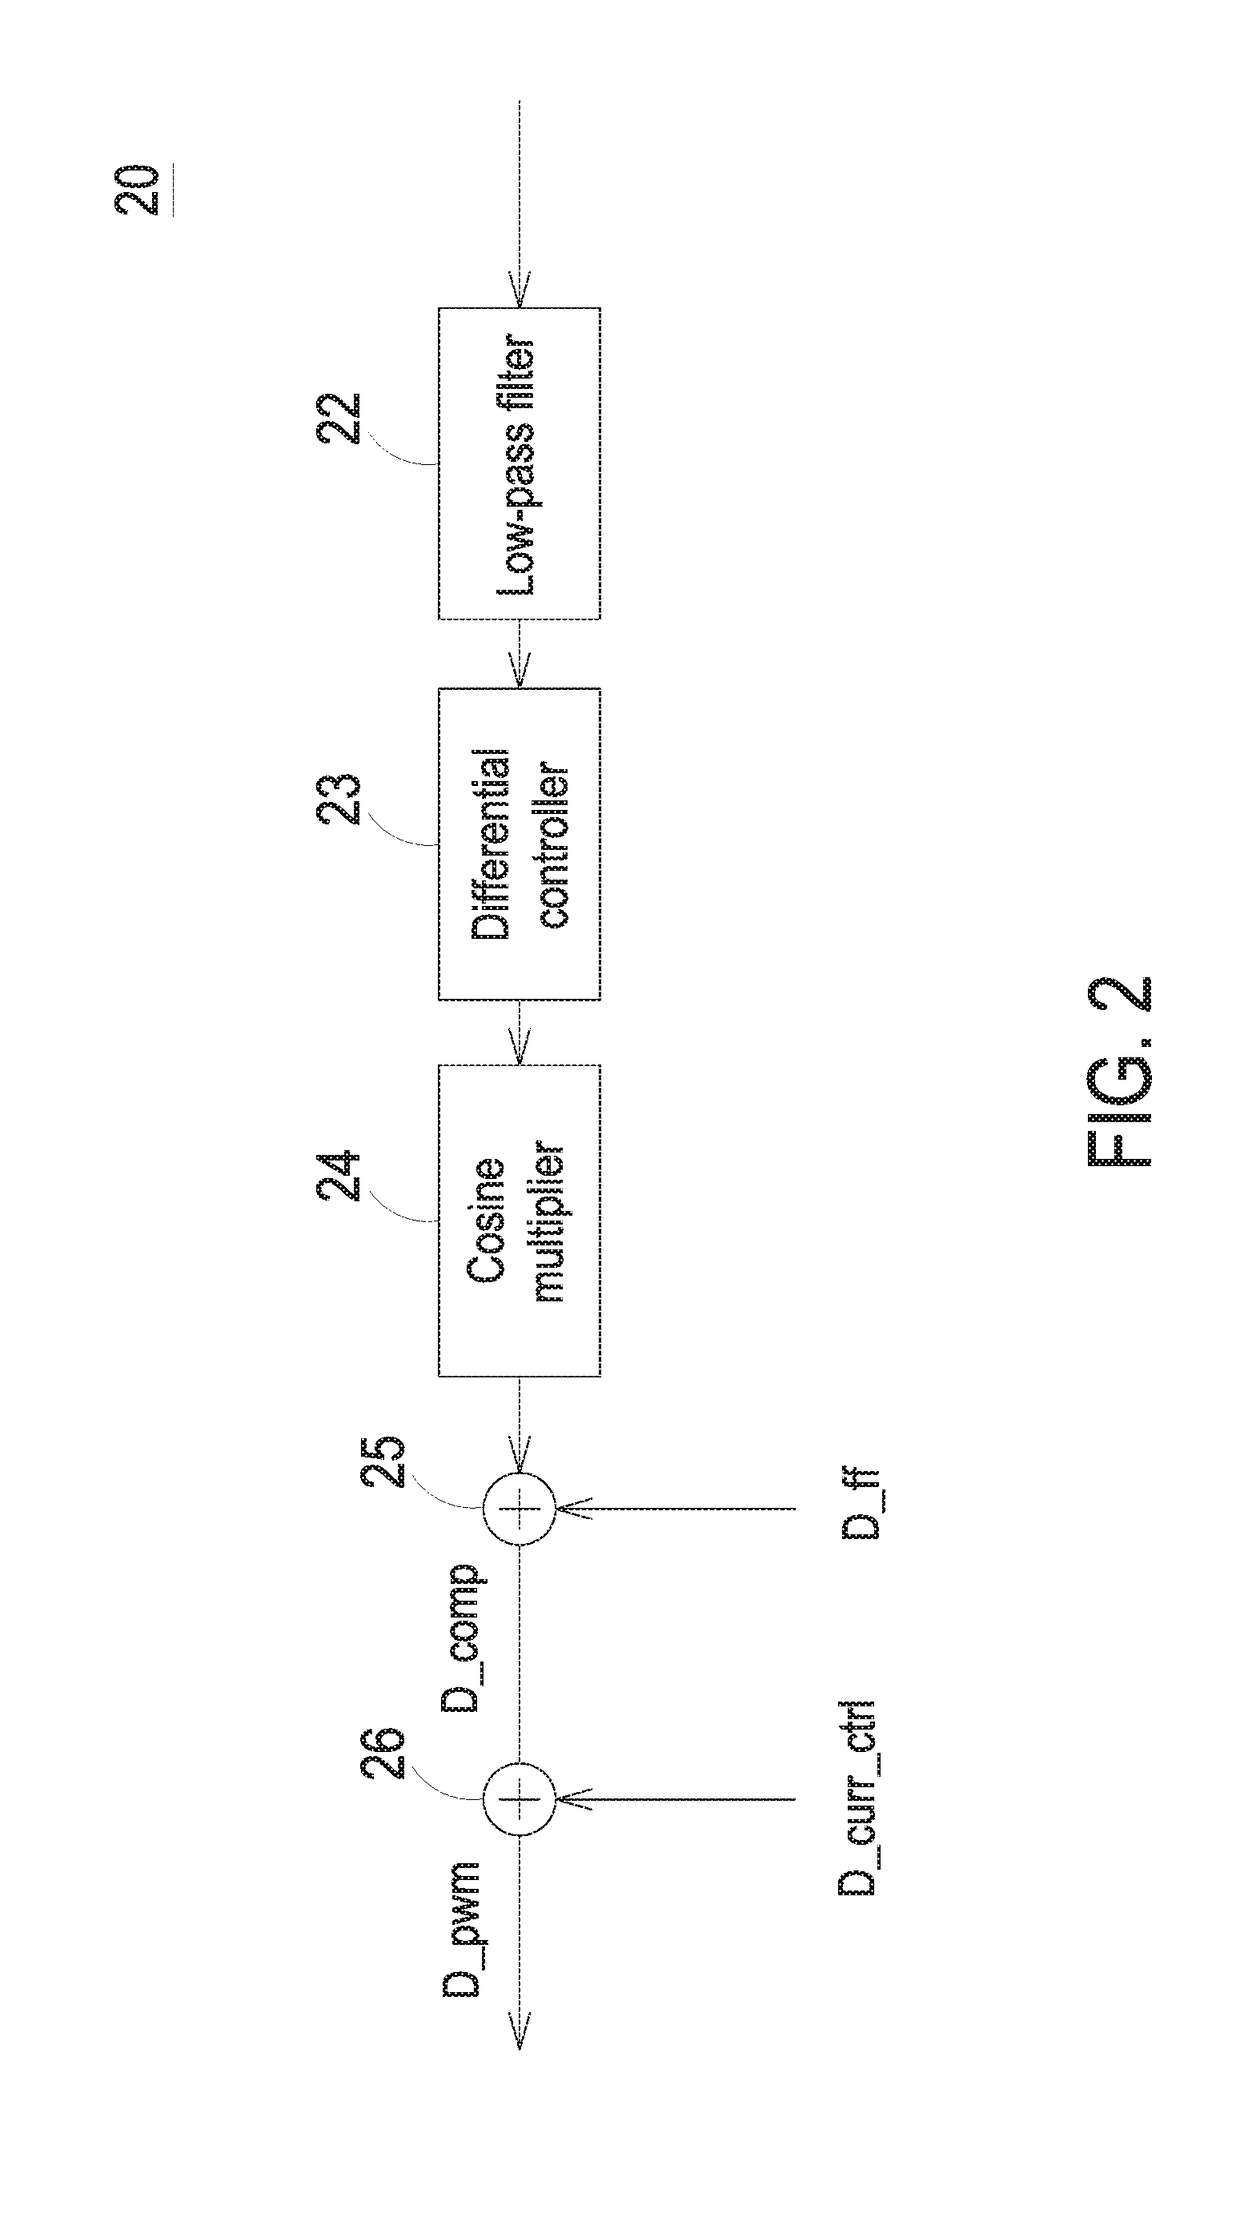 Phase compensation method for power factor correction circuit